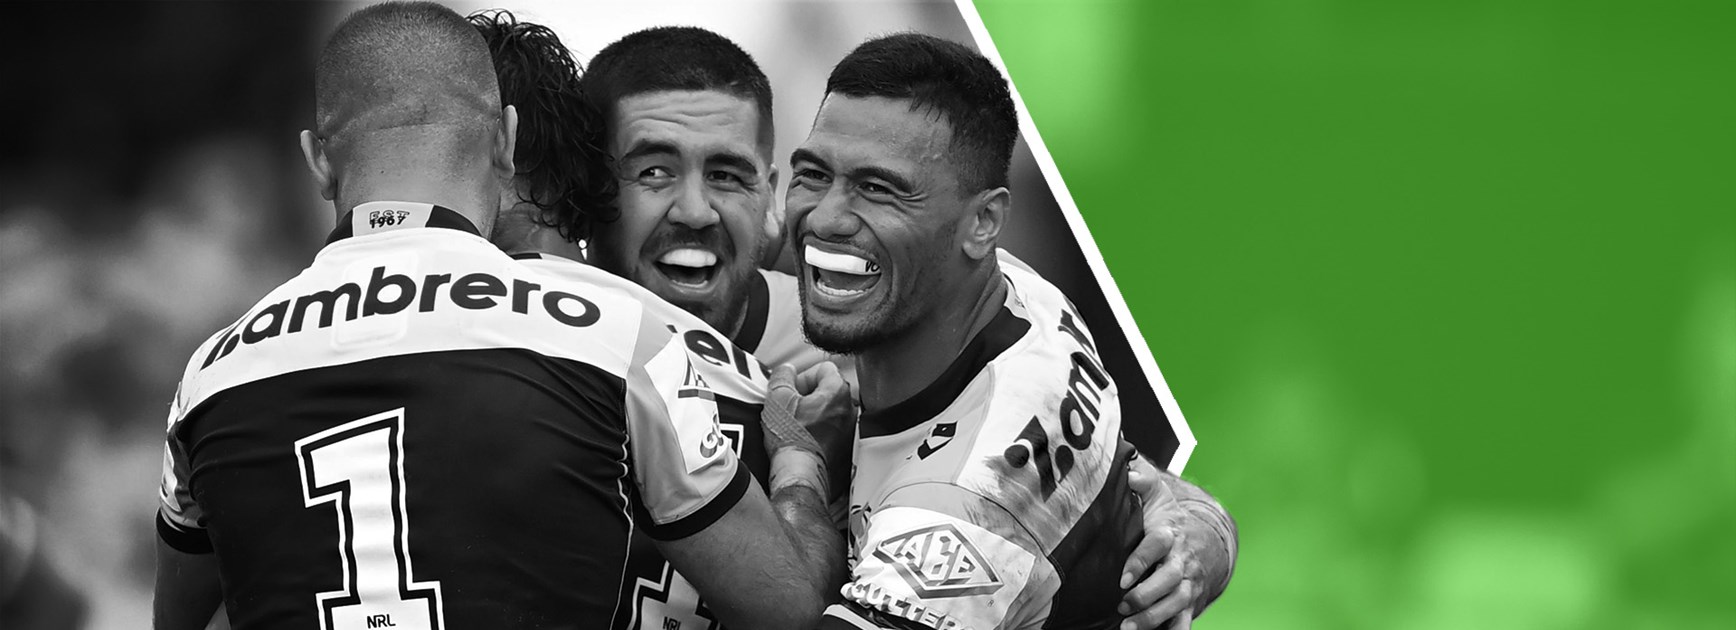 NRL Tipping: Expert tips for Round 20